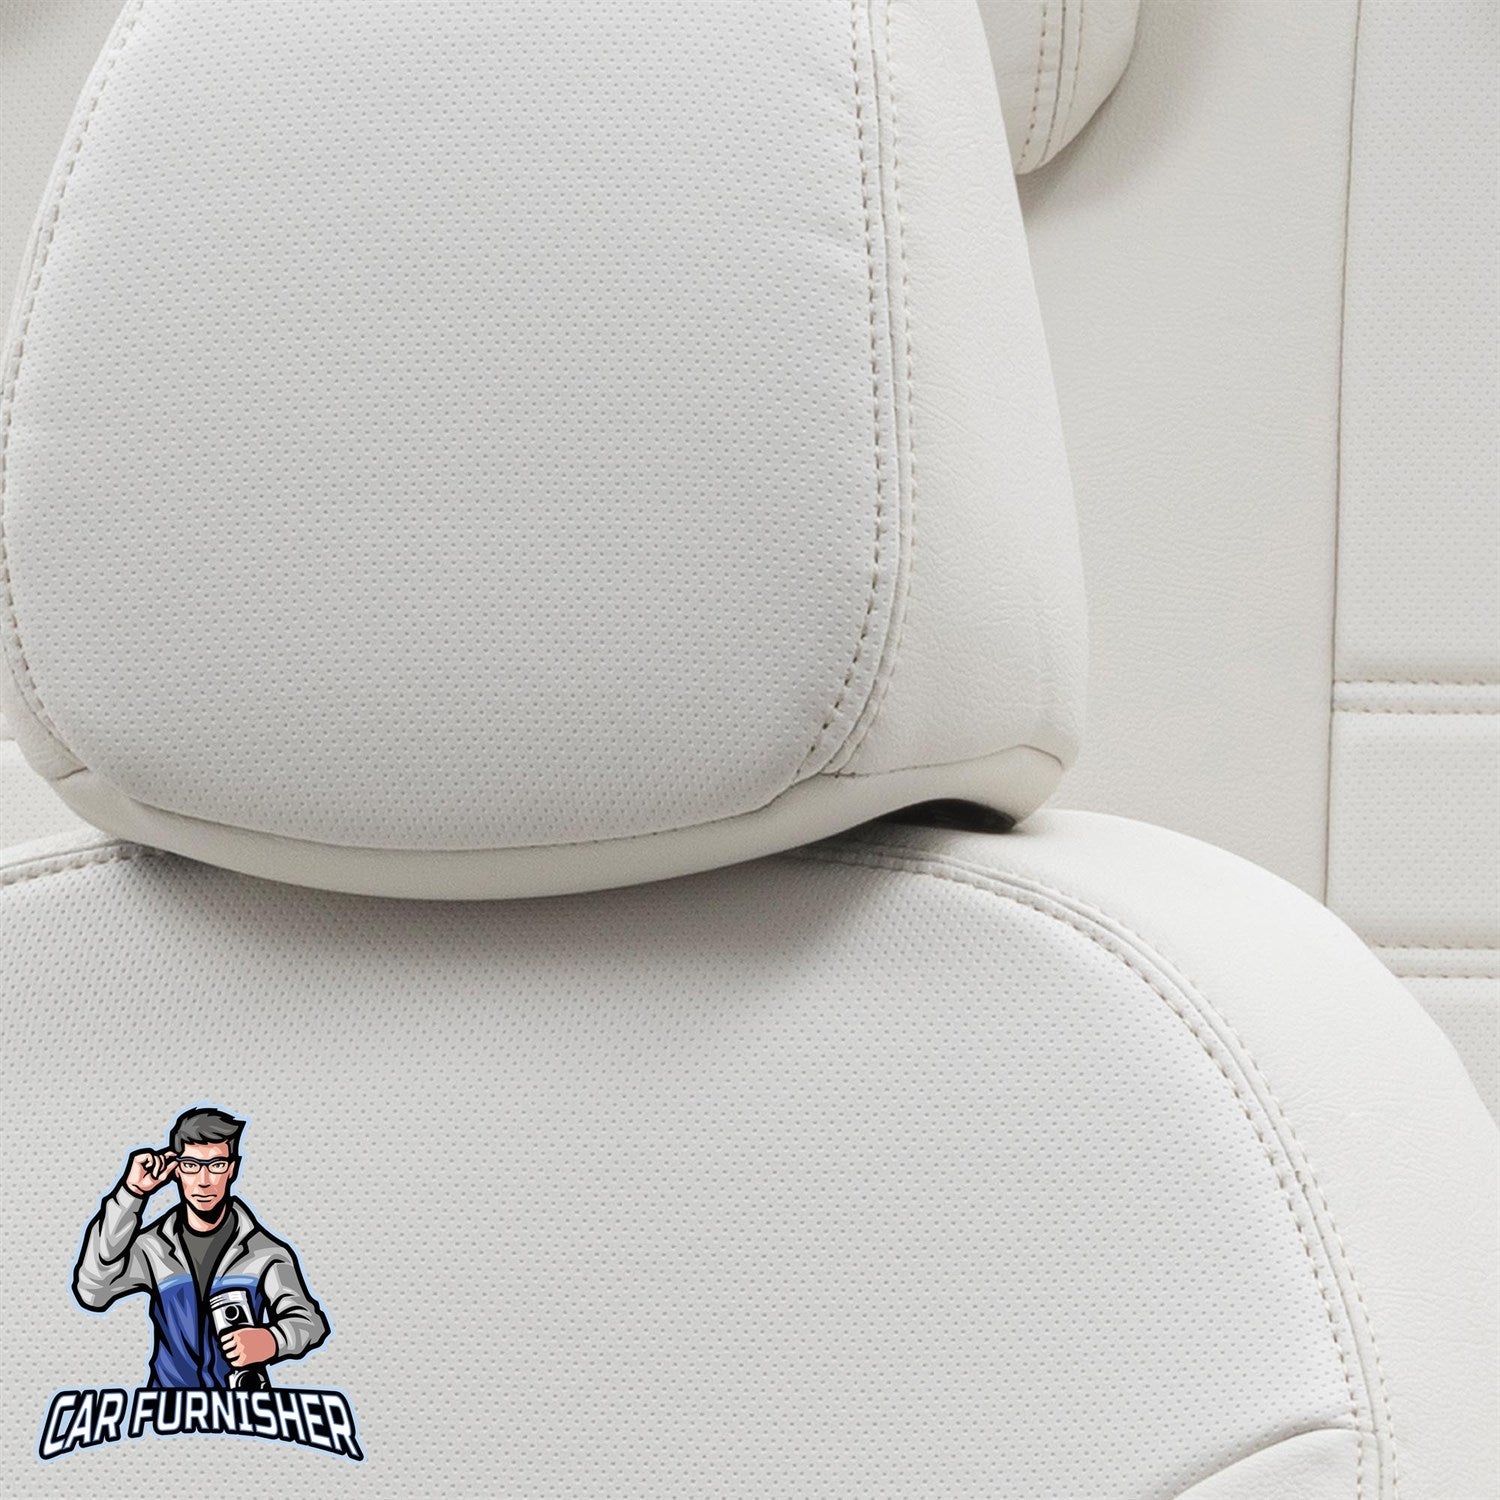 Mitsubishi L-300 Seat Covers Istanbul Leather Design Ivory Leather